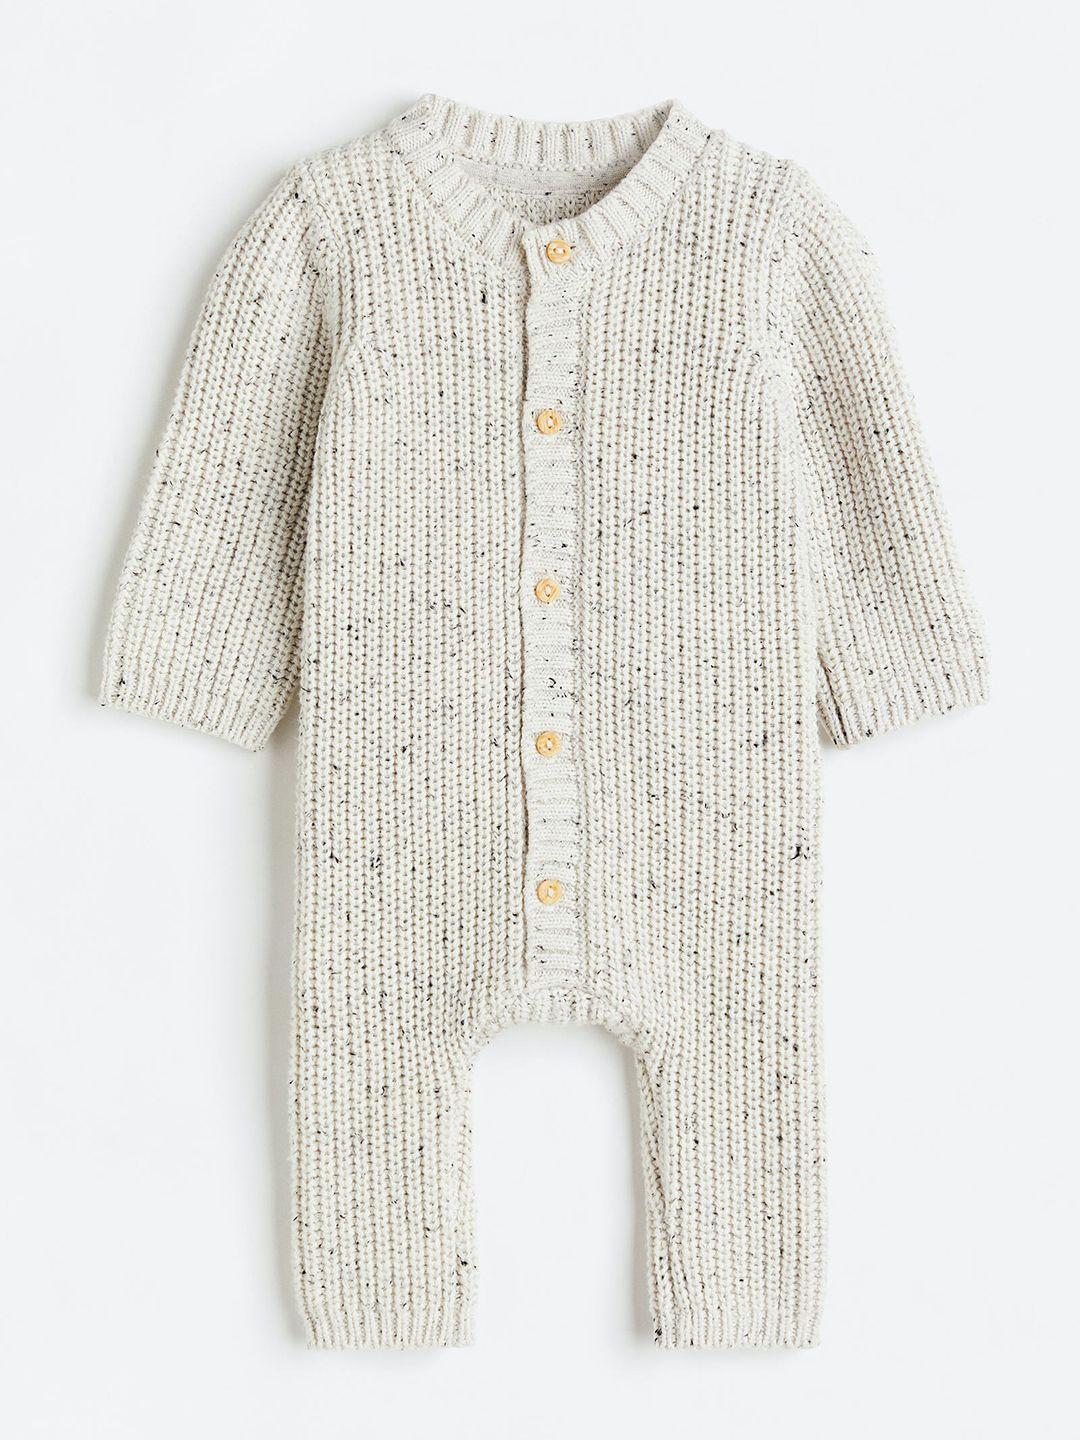 h&m infant boys knitted cotton romper suit